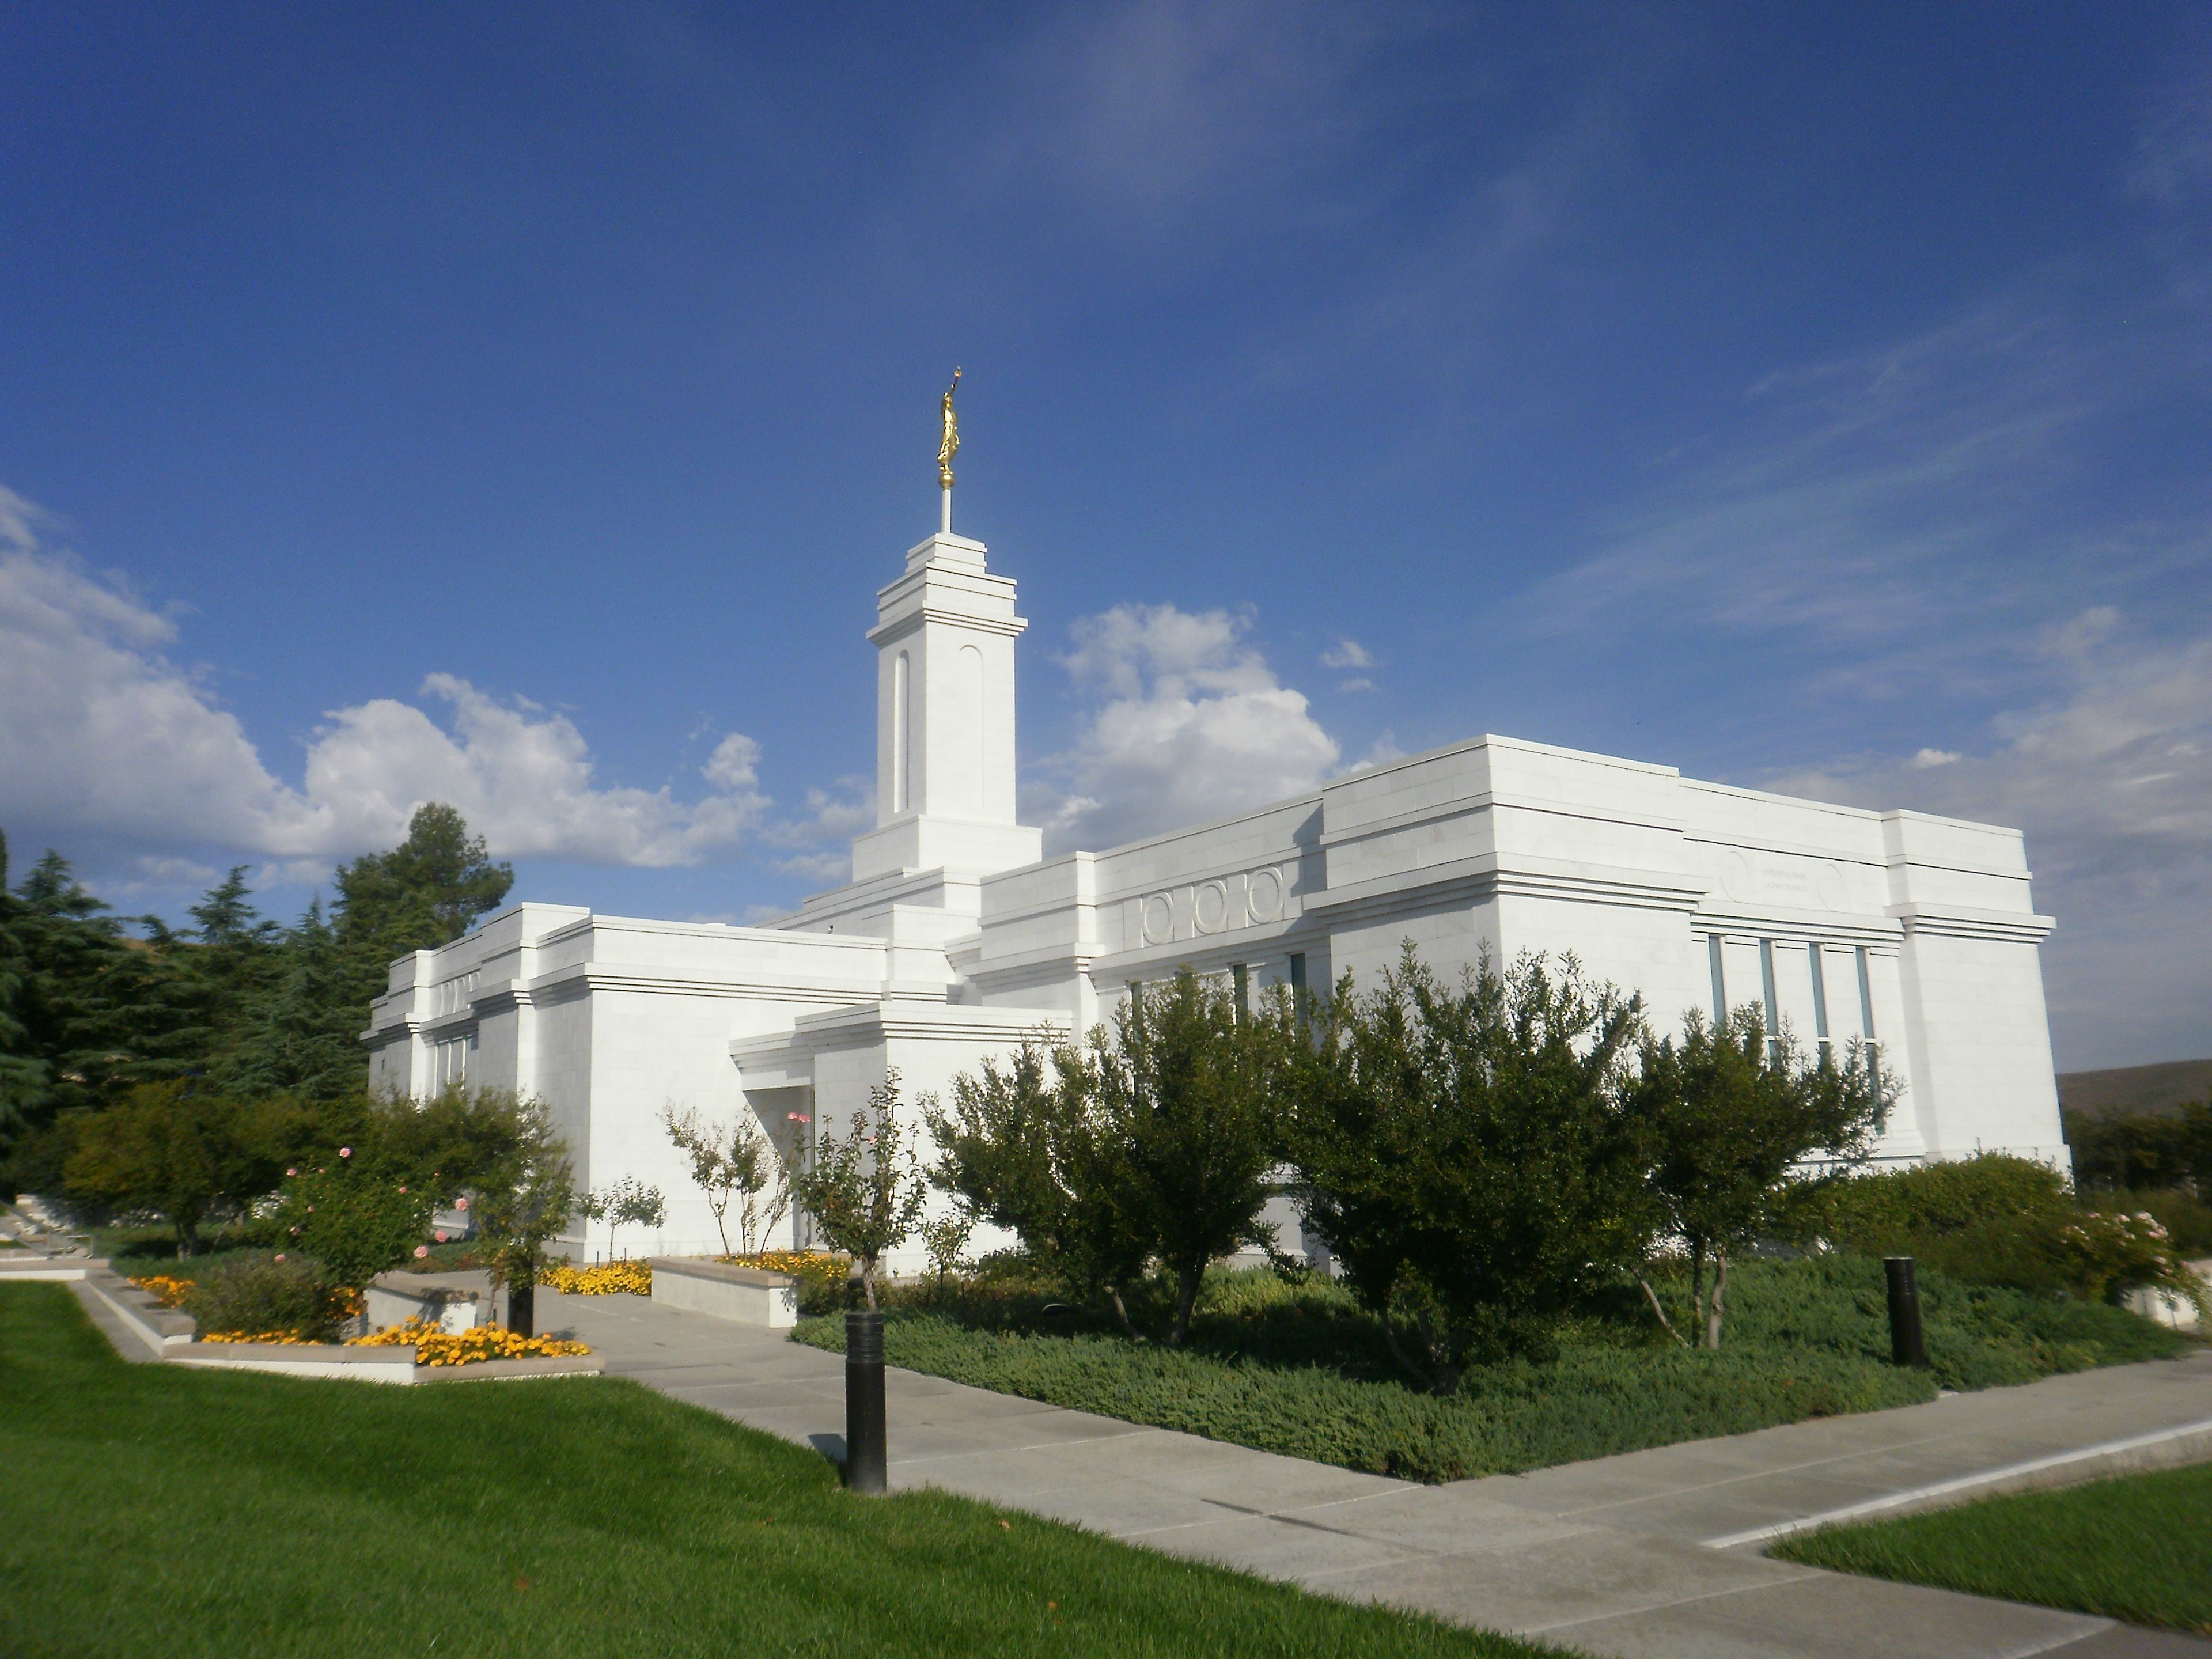 A side view of the Colonia Juárez Chihuahua Mexico Temple.